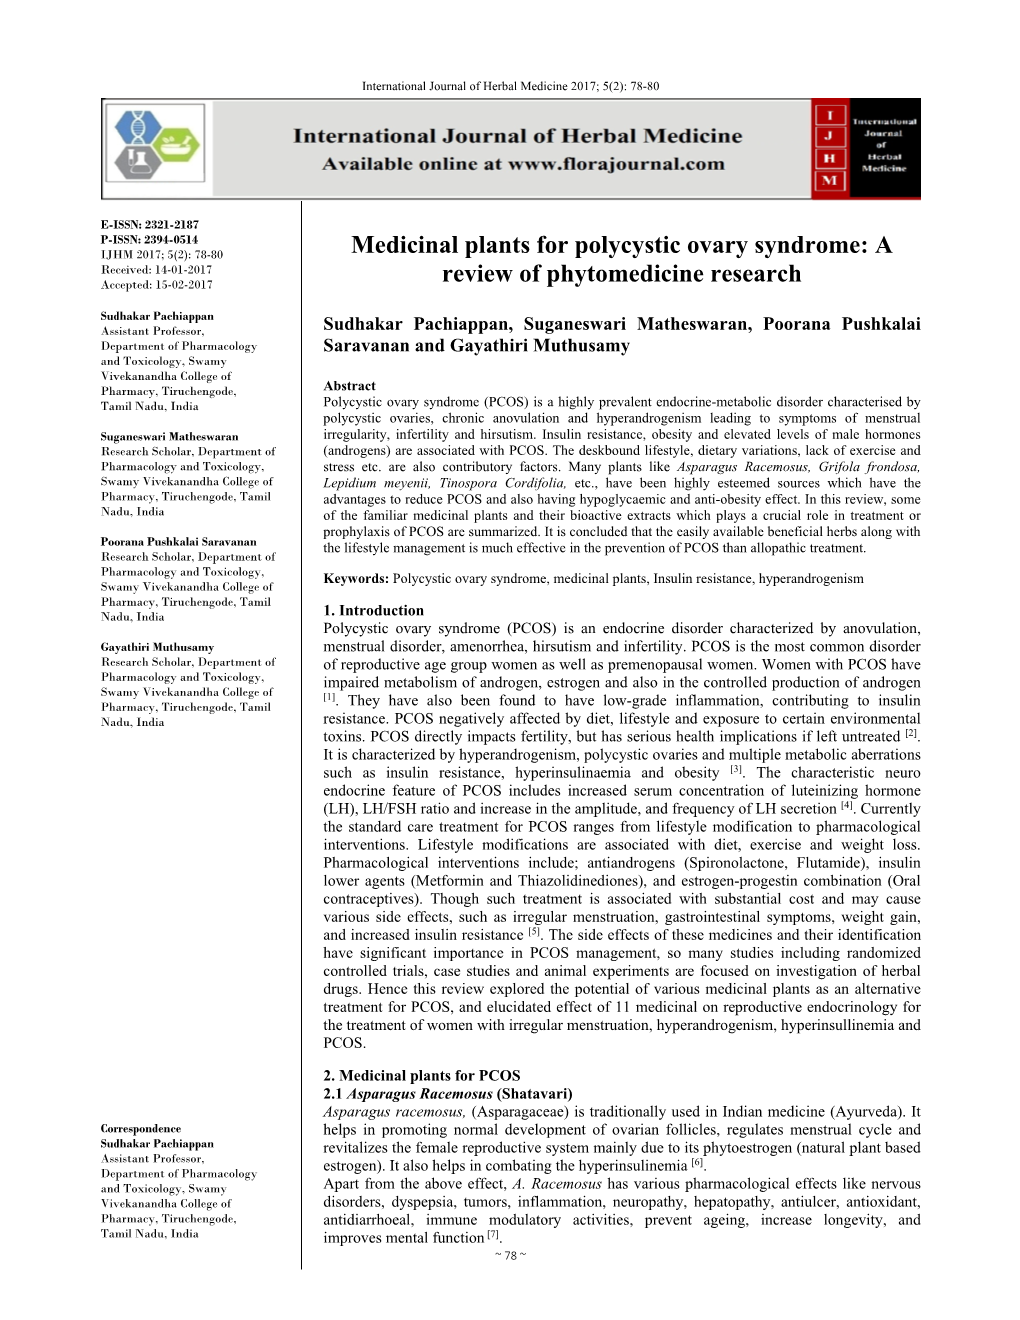 Medicinal Plants for Polycystic Ovary Syndrome: a Received: 14-01-2017 Accepted: 15-02-2017 Review of Phytomedicine Research